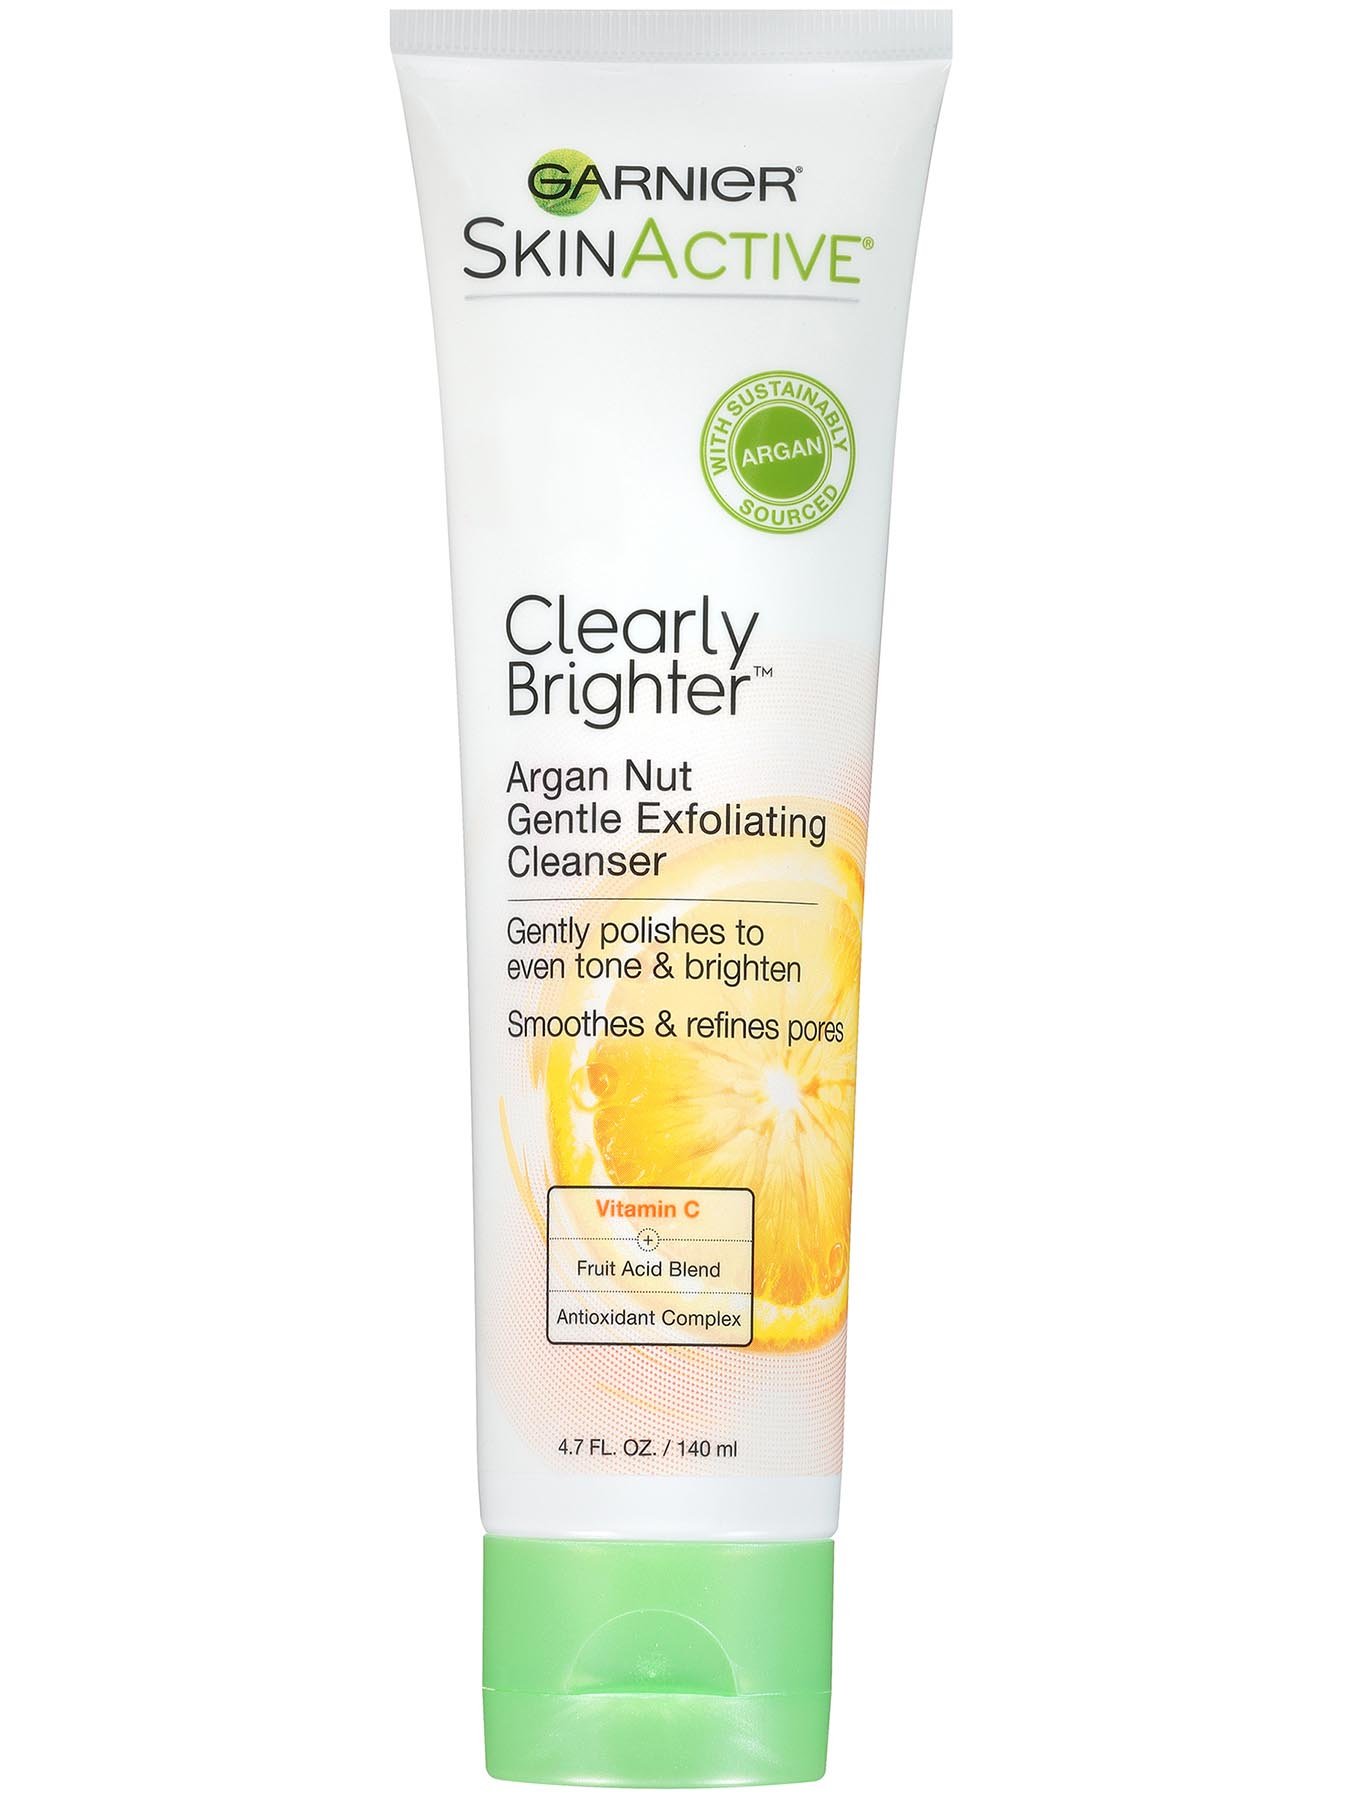 Front view of Clearly Brighter Argan Nut Gentle Exfoliating Cleanser.